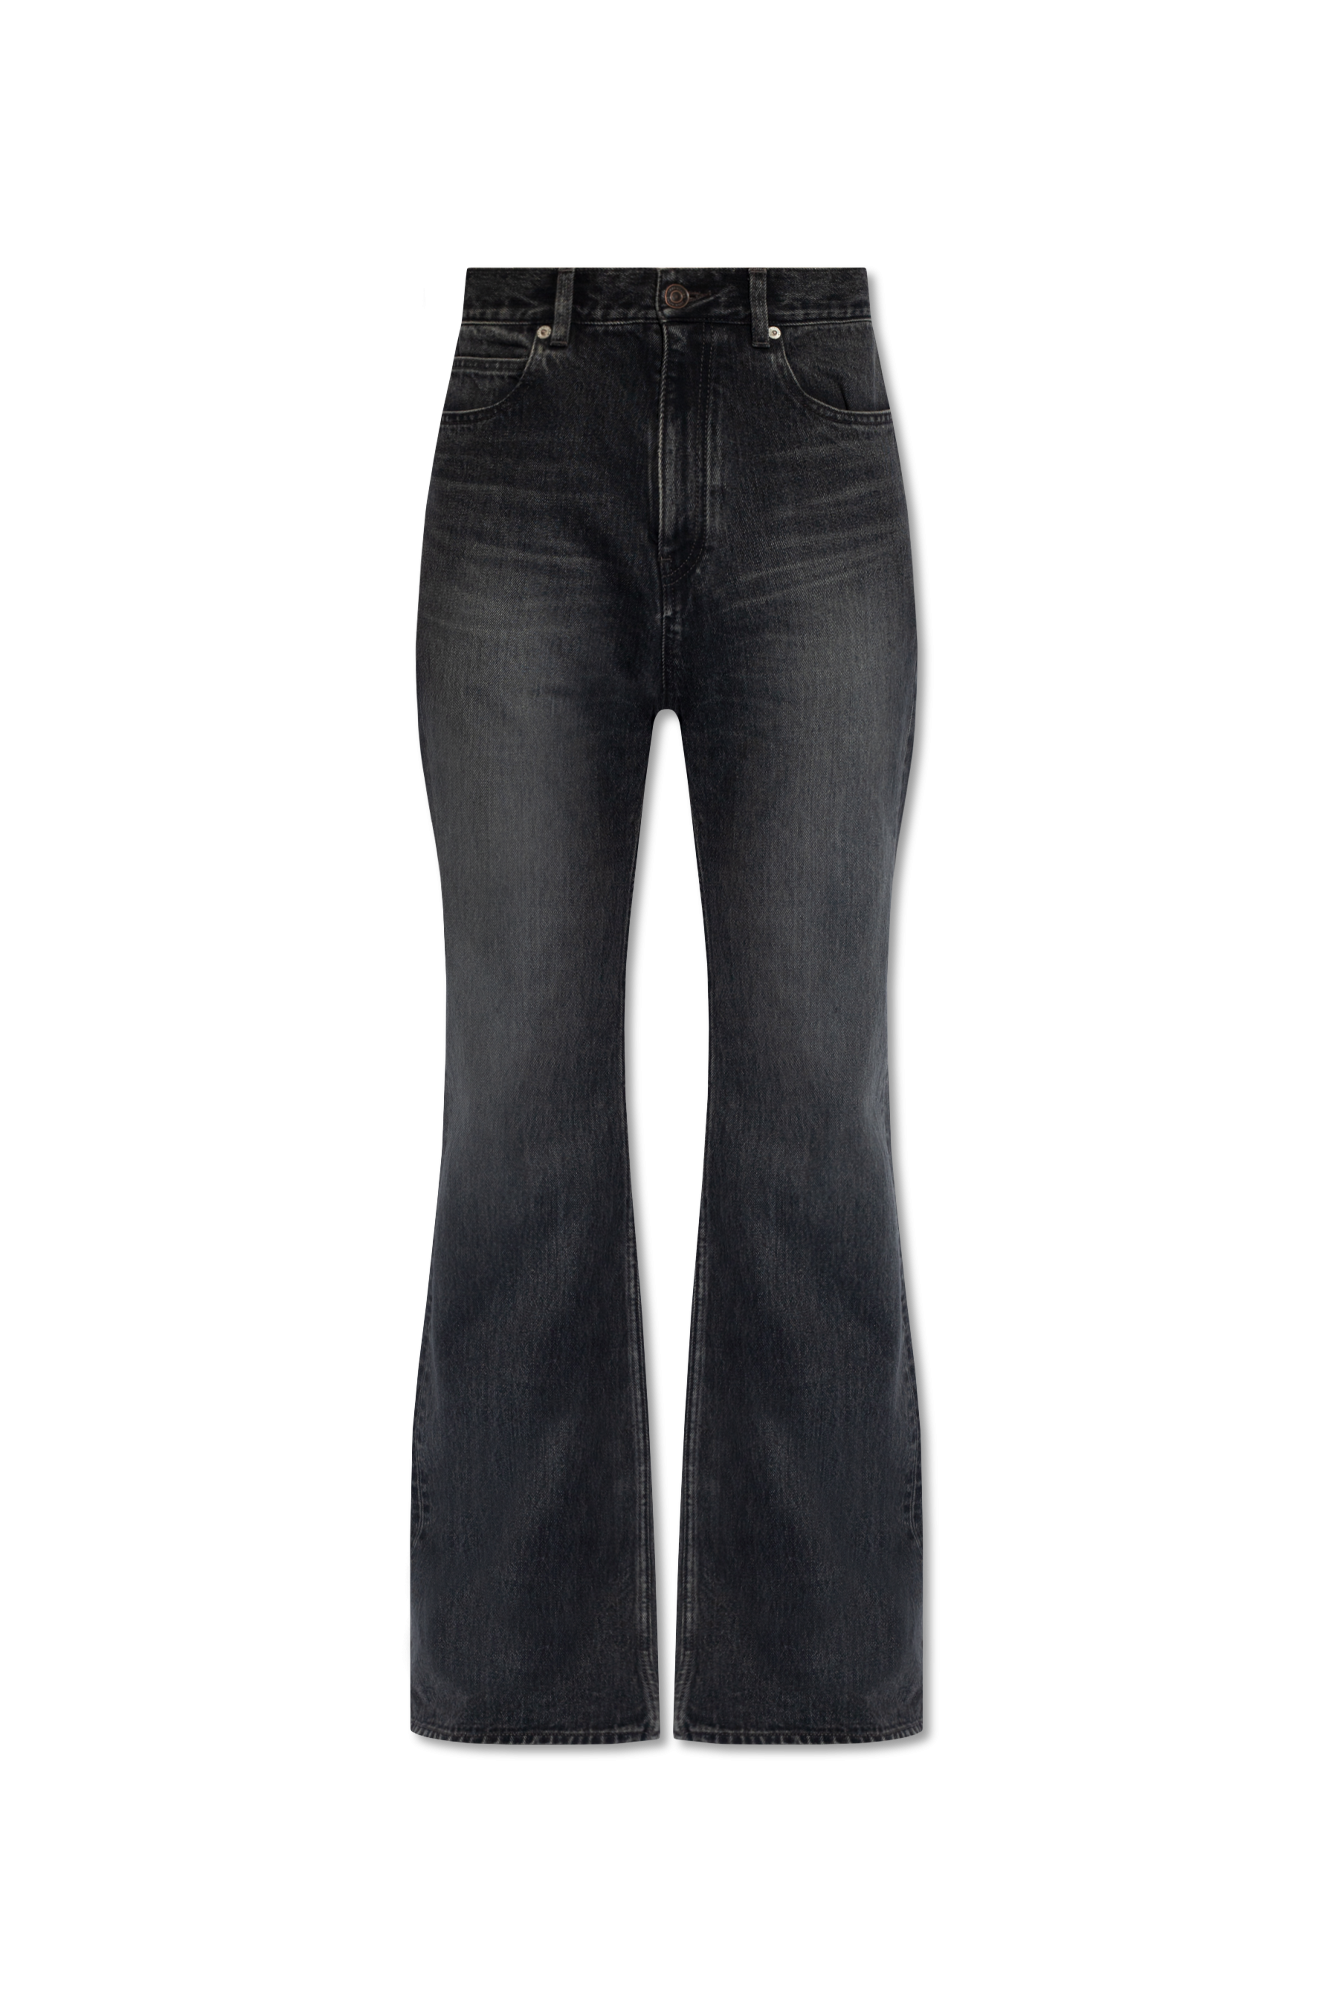 Low-rise flared jeans in black - Tom Ford